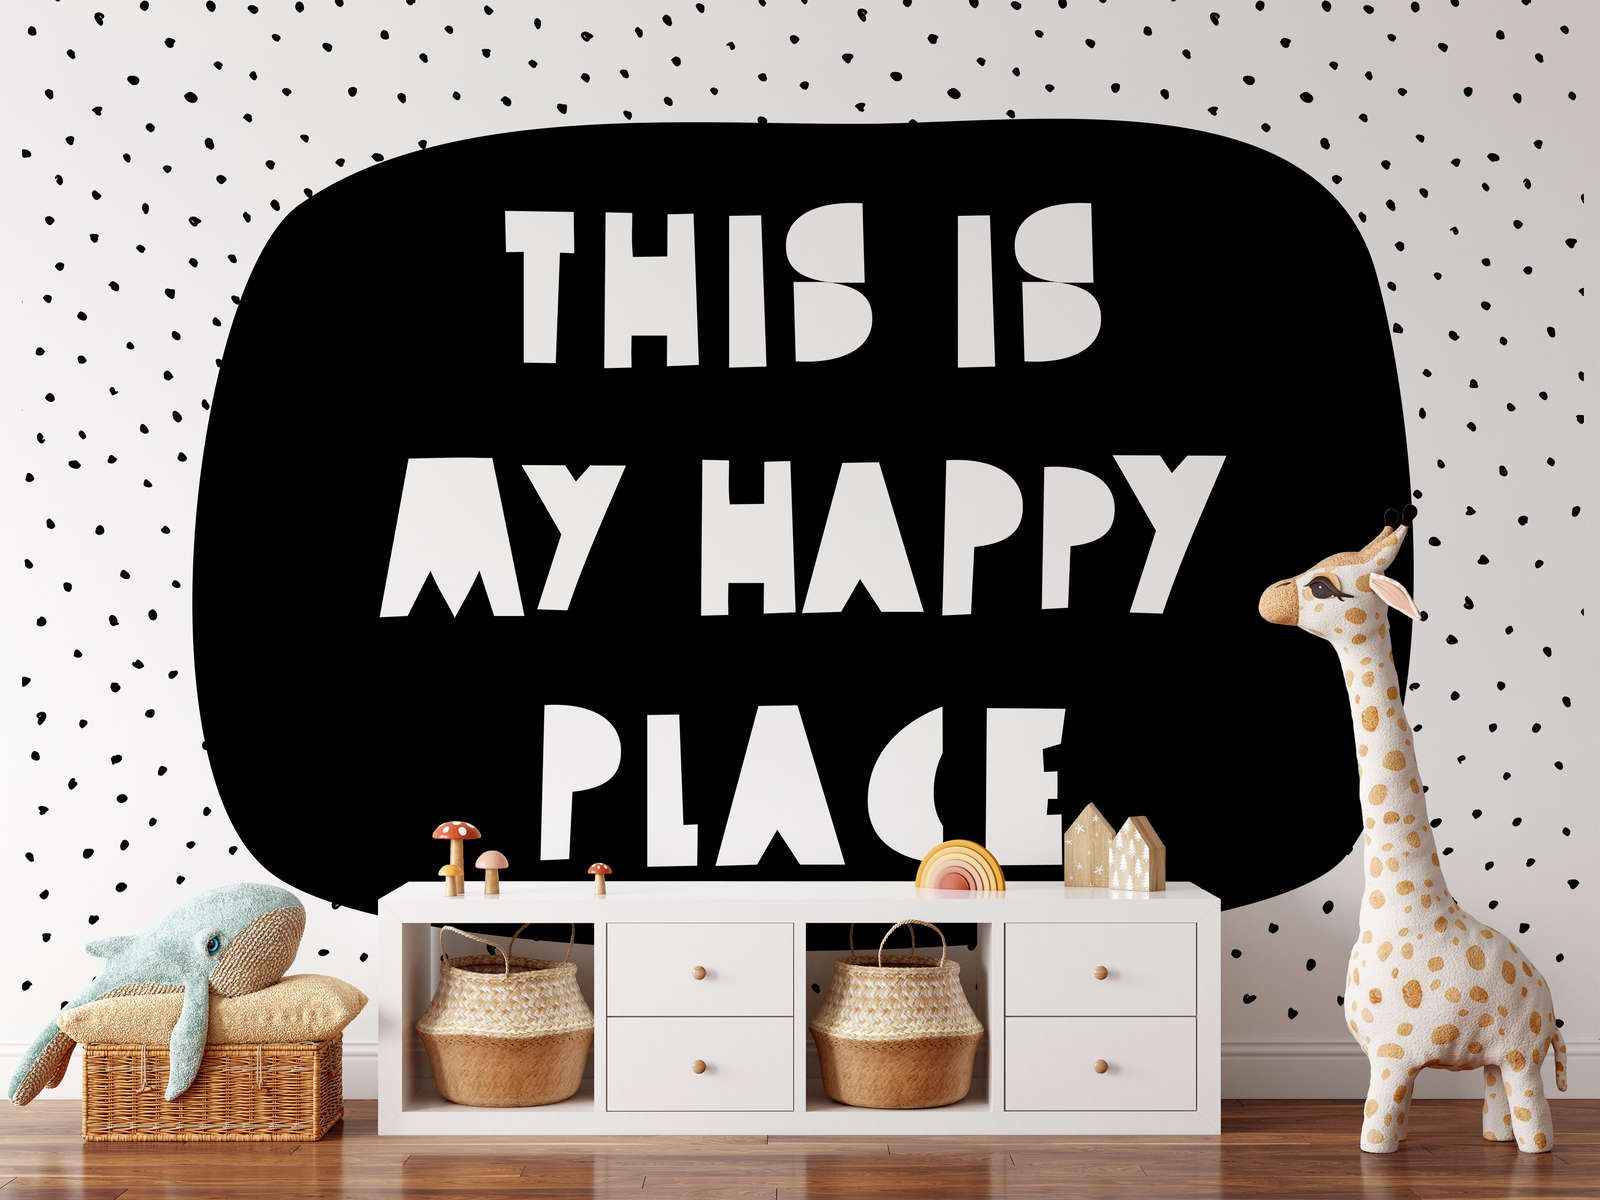             Photo wallpaper for children's room with lettering "This is my happy place" - Smooth & slightly glossy non-woven
        